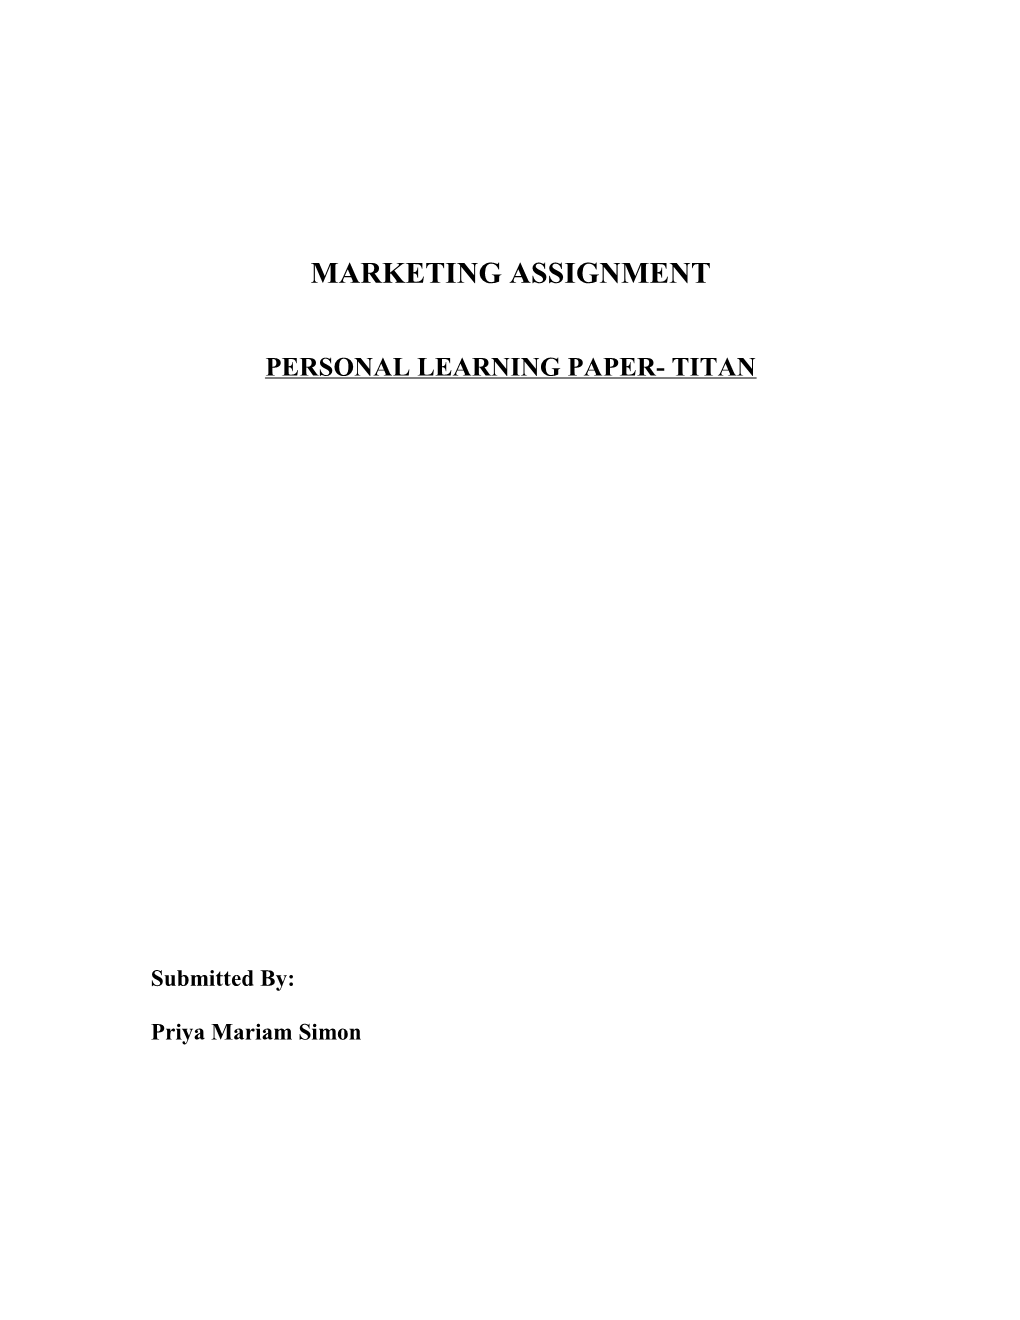 Personal Learning Paper- Titan